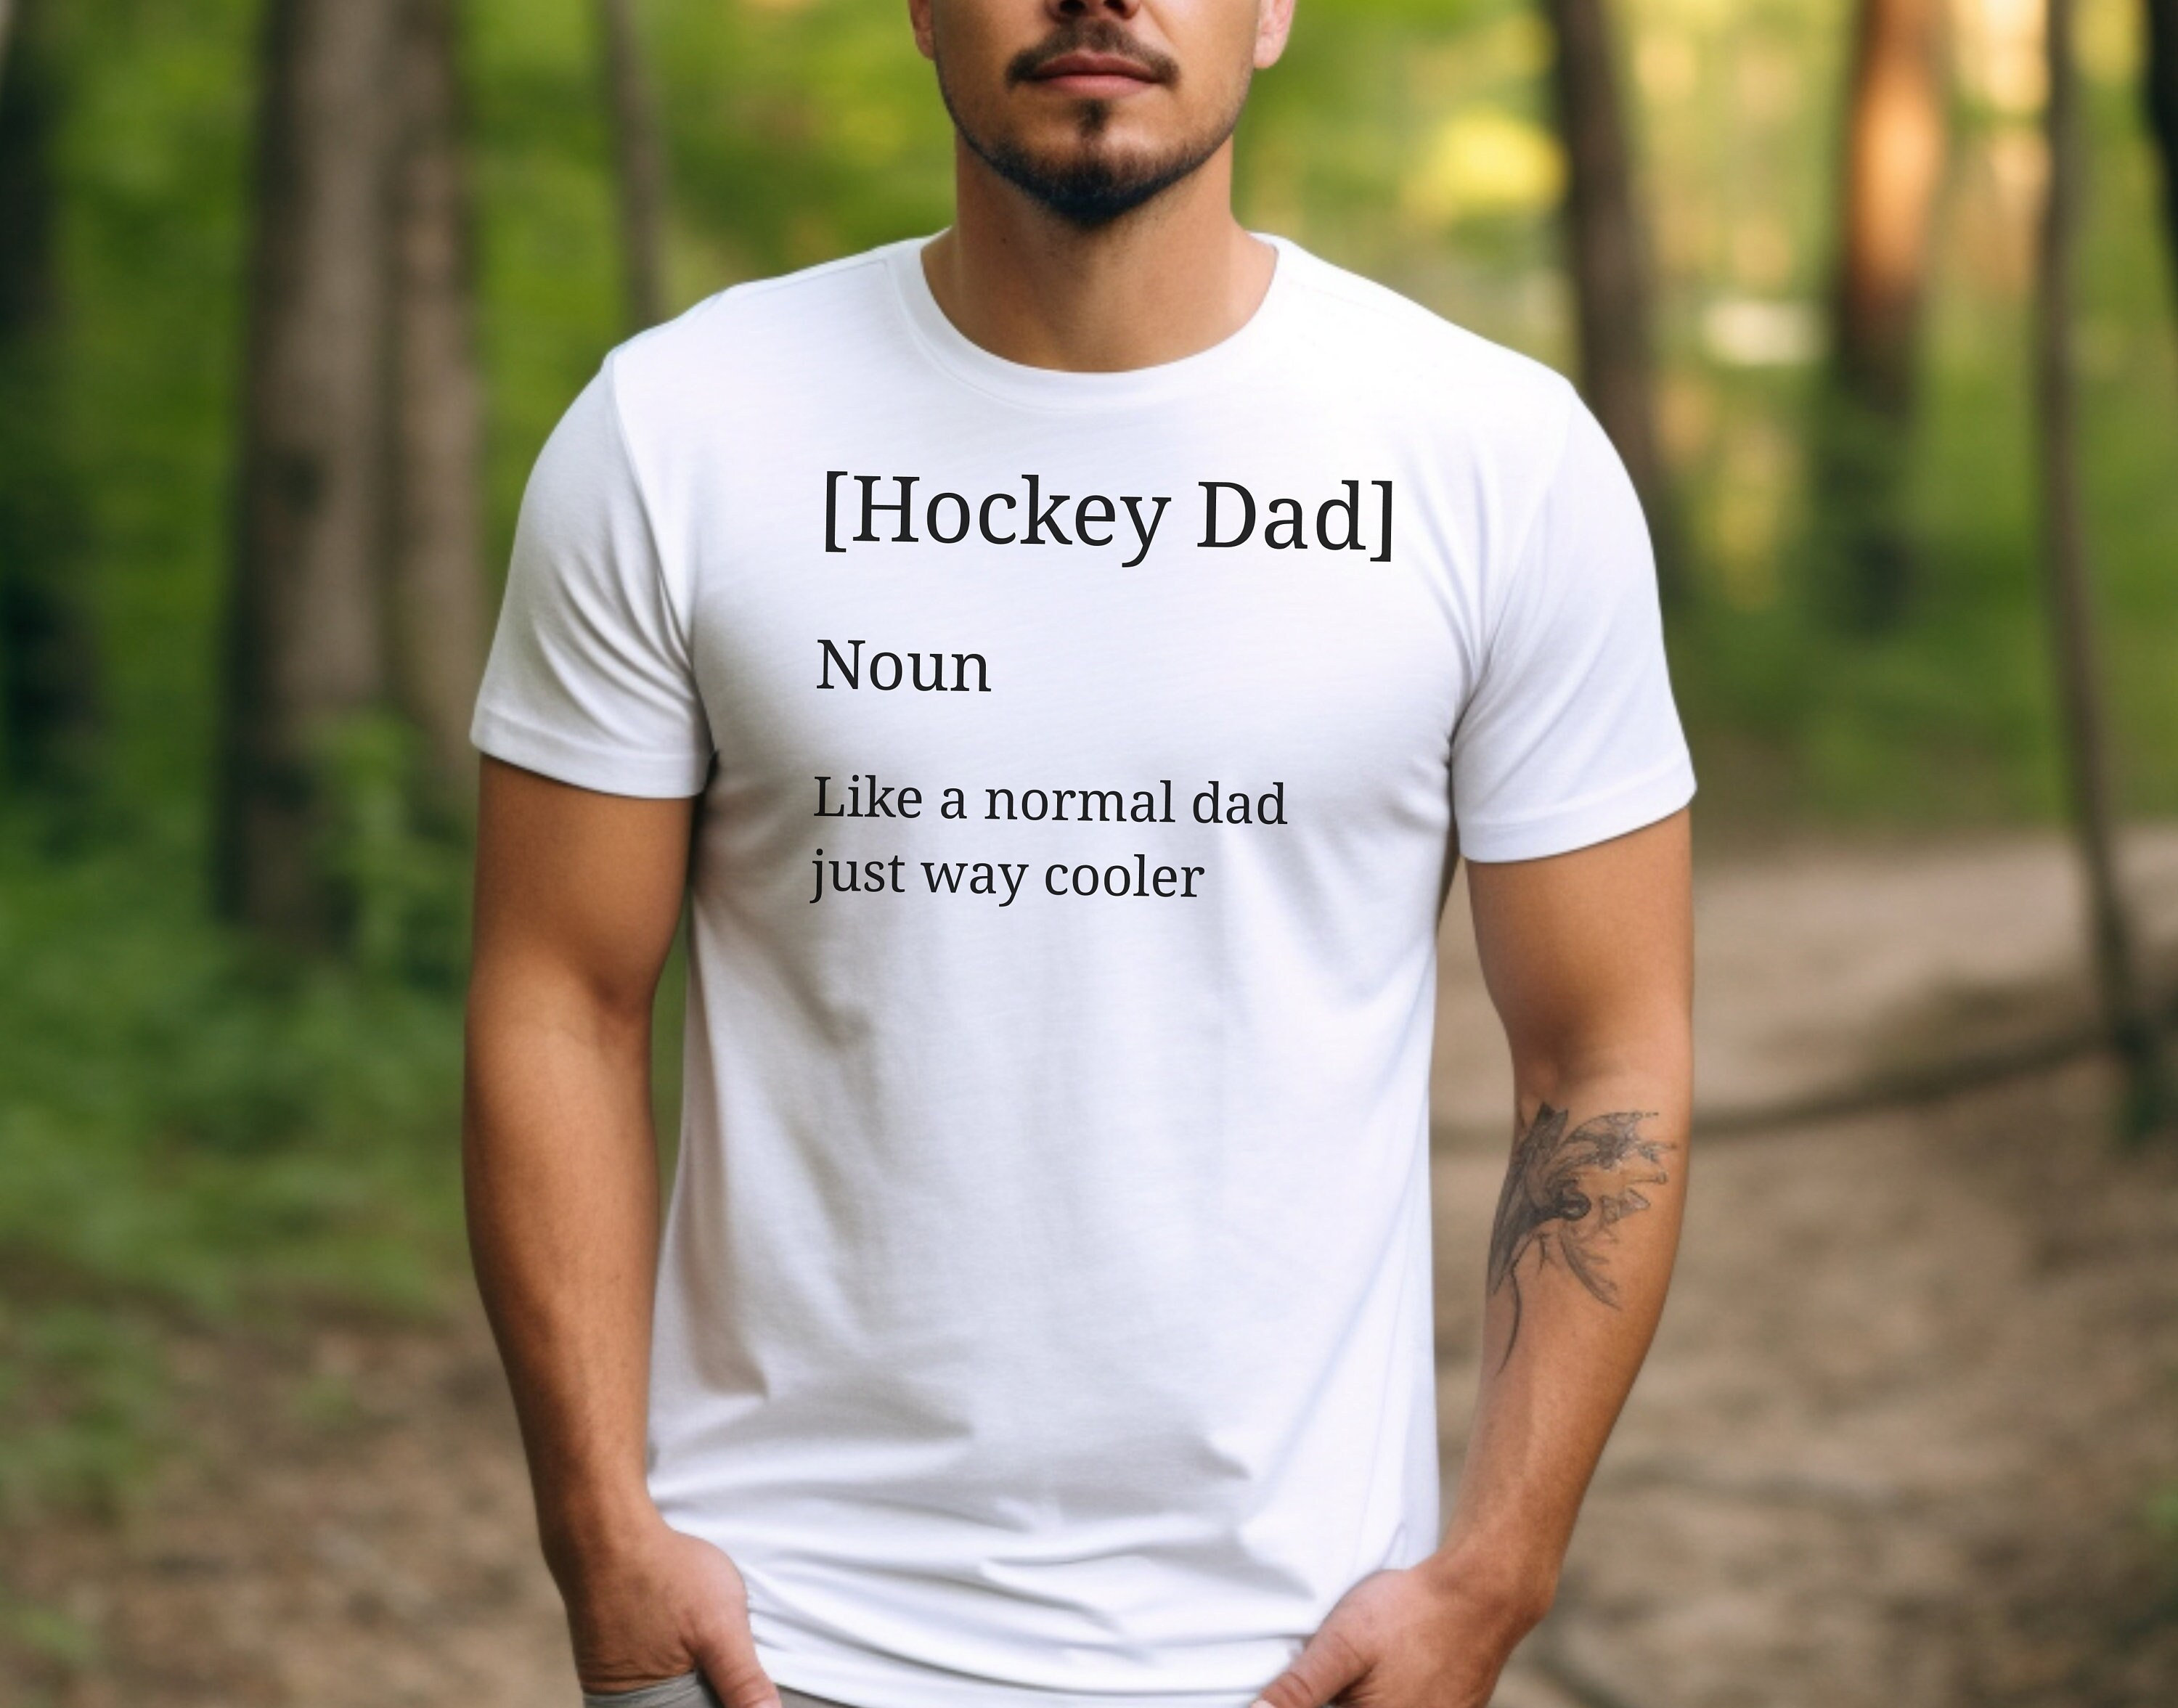 Best pucking dad ever - father hockey player, father's day gift Shirt,  Hoodie, Sweatshirt - FridayStuff